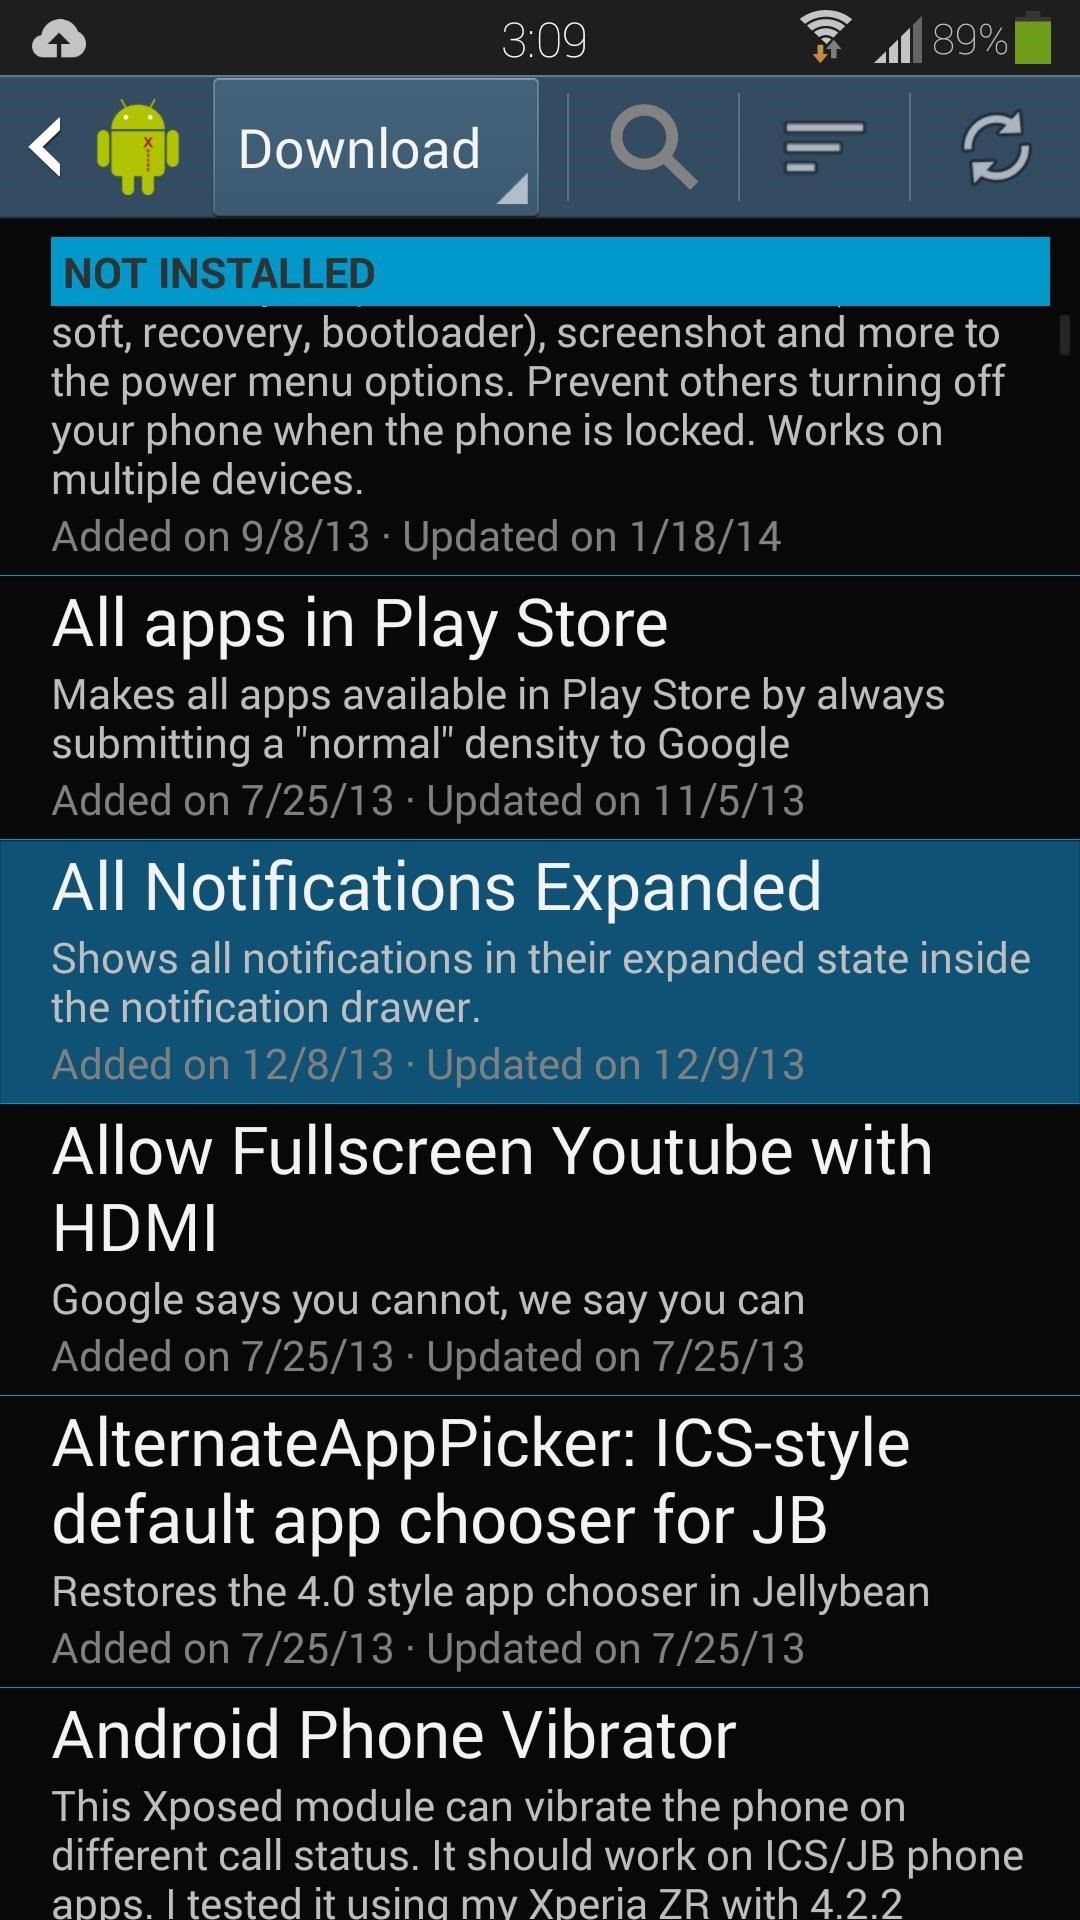 How to Get Automatically Expanded Notifications on Your Samsung Galaxy S4